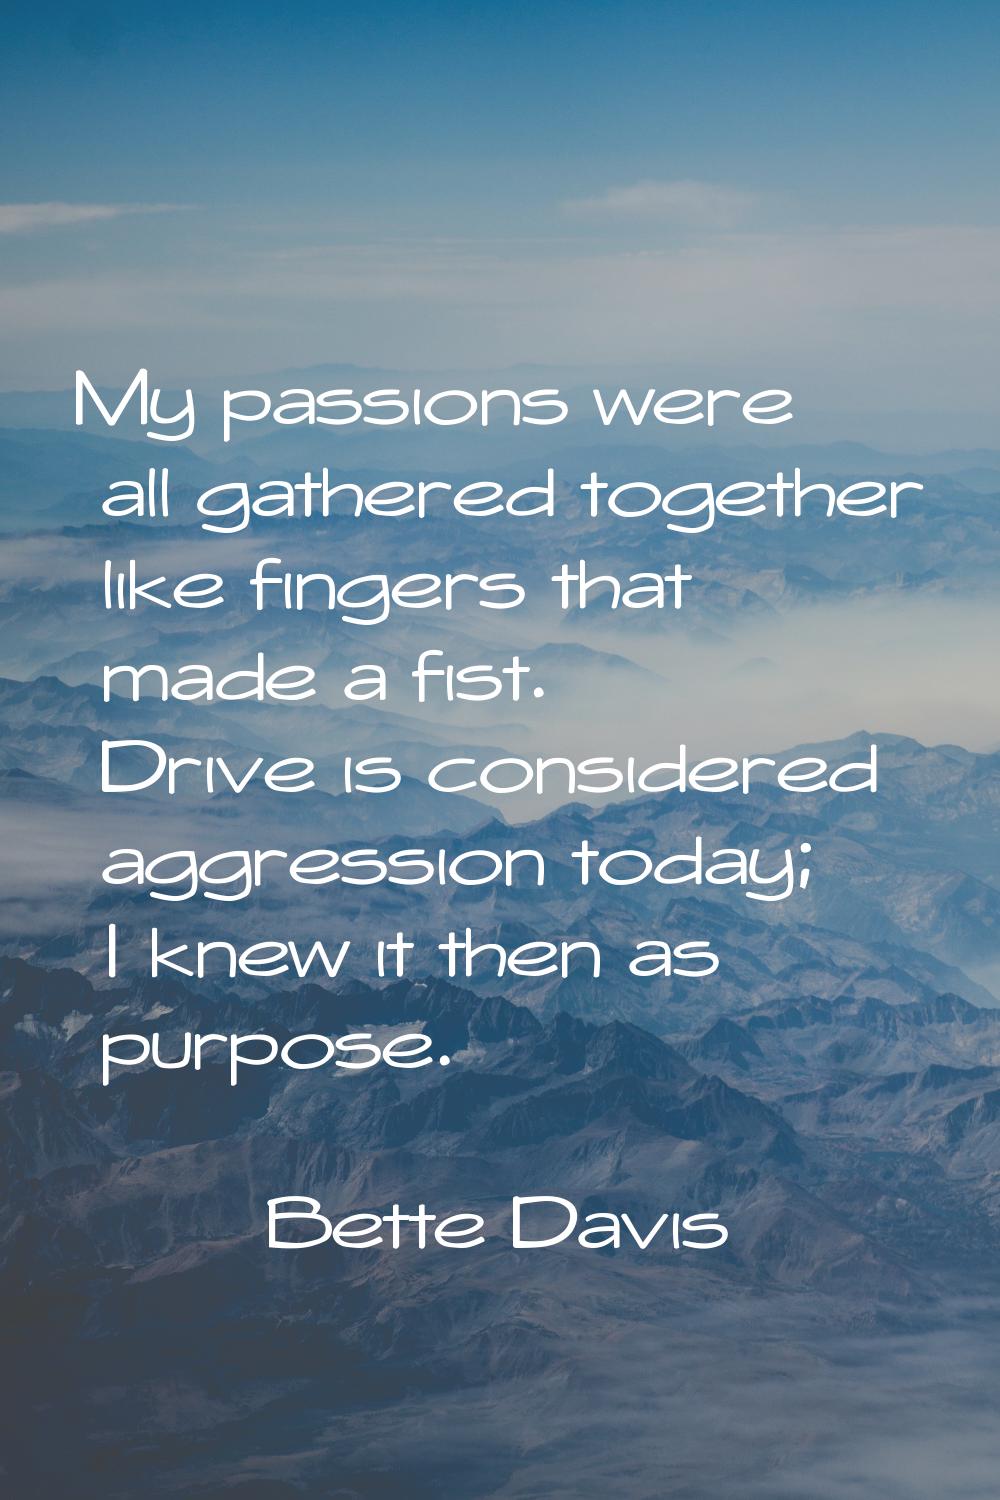 My passions were all gathered together like fingers that made a fist. Drive is considered aggressio